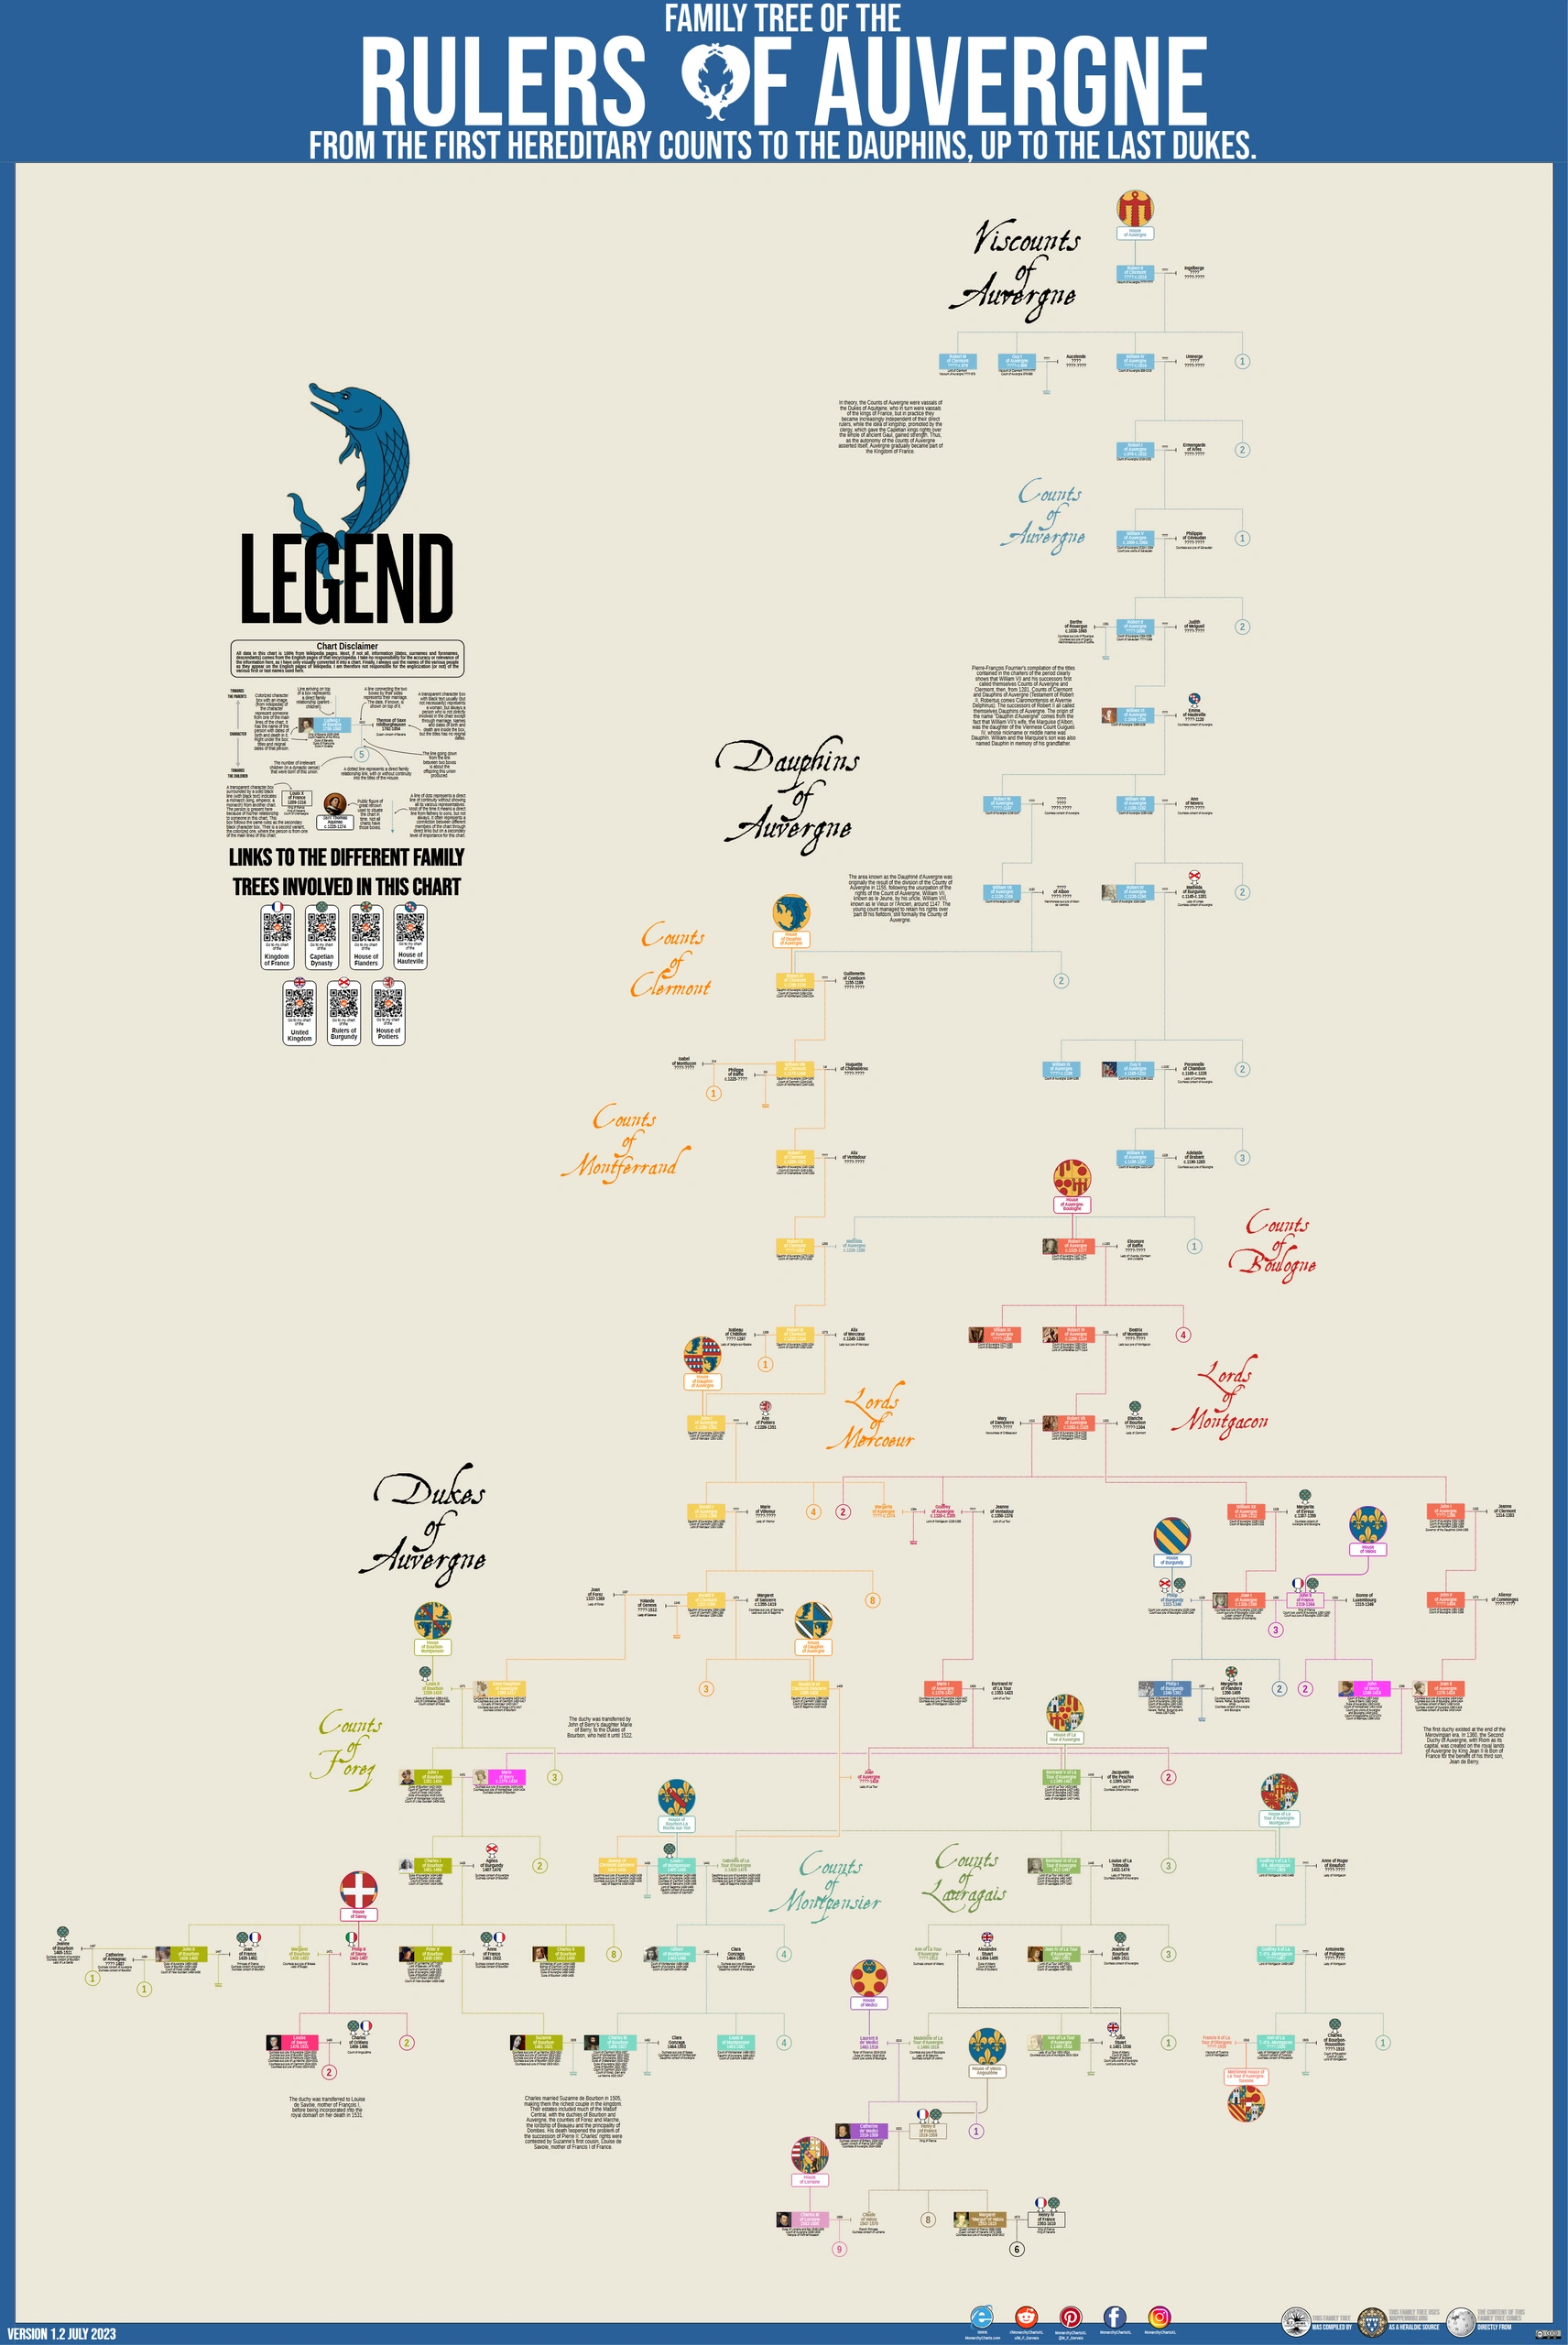 Chart, Family Tree of the rulers of Auvergne.